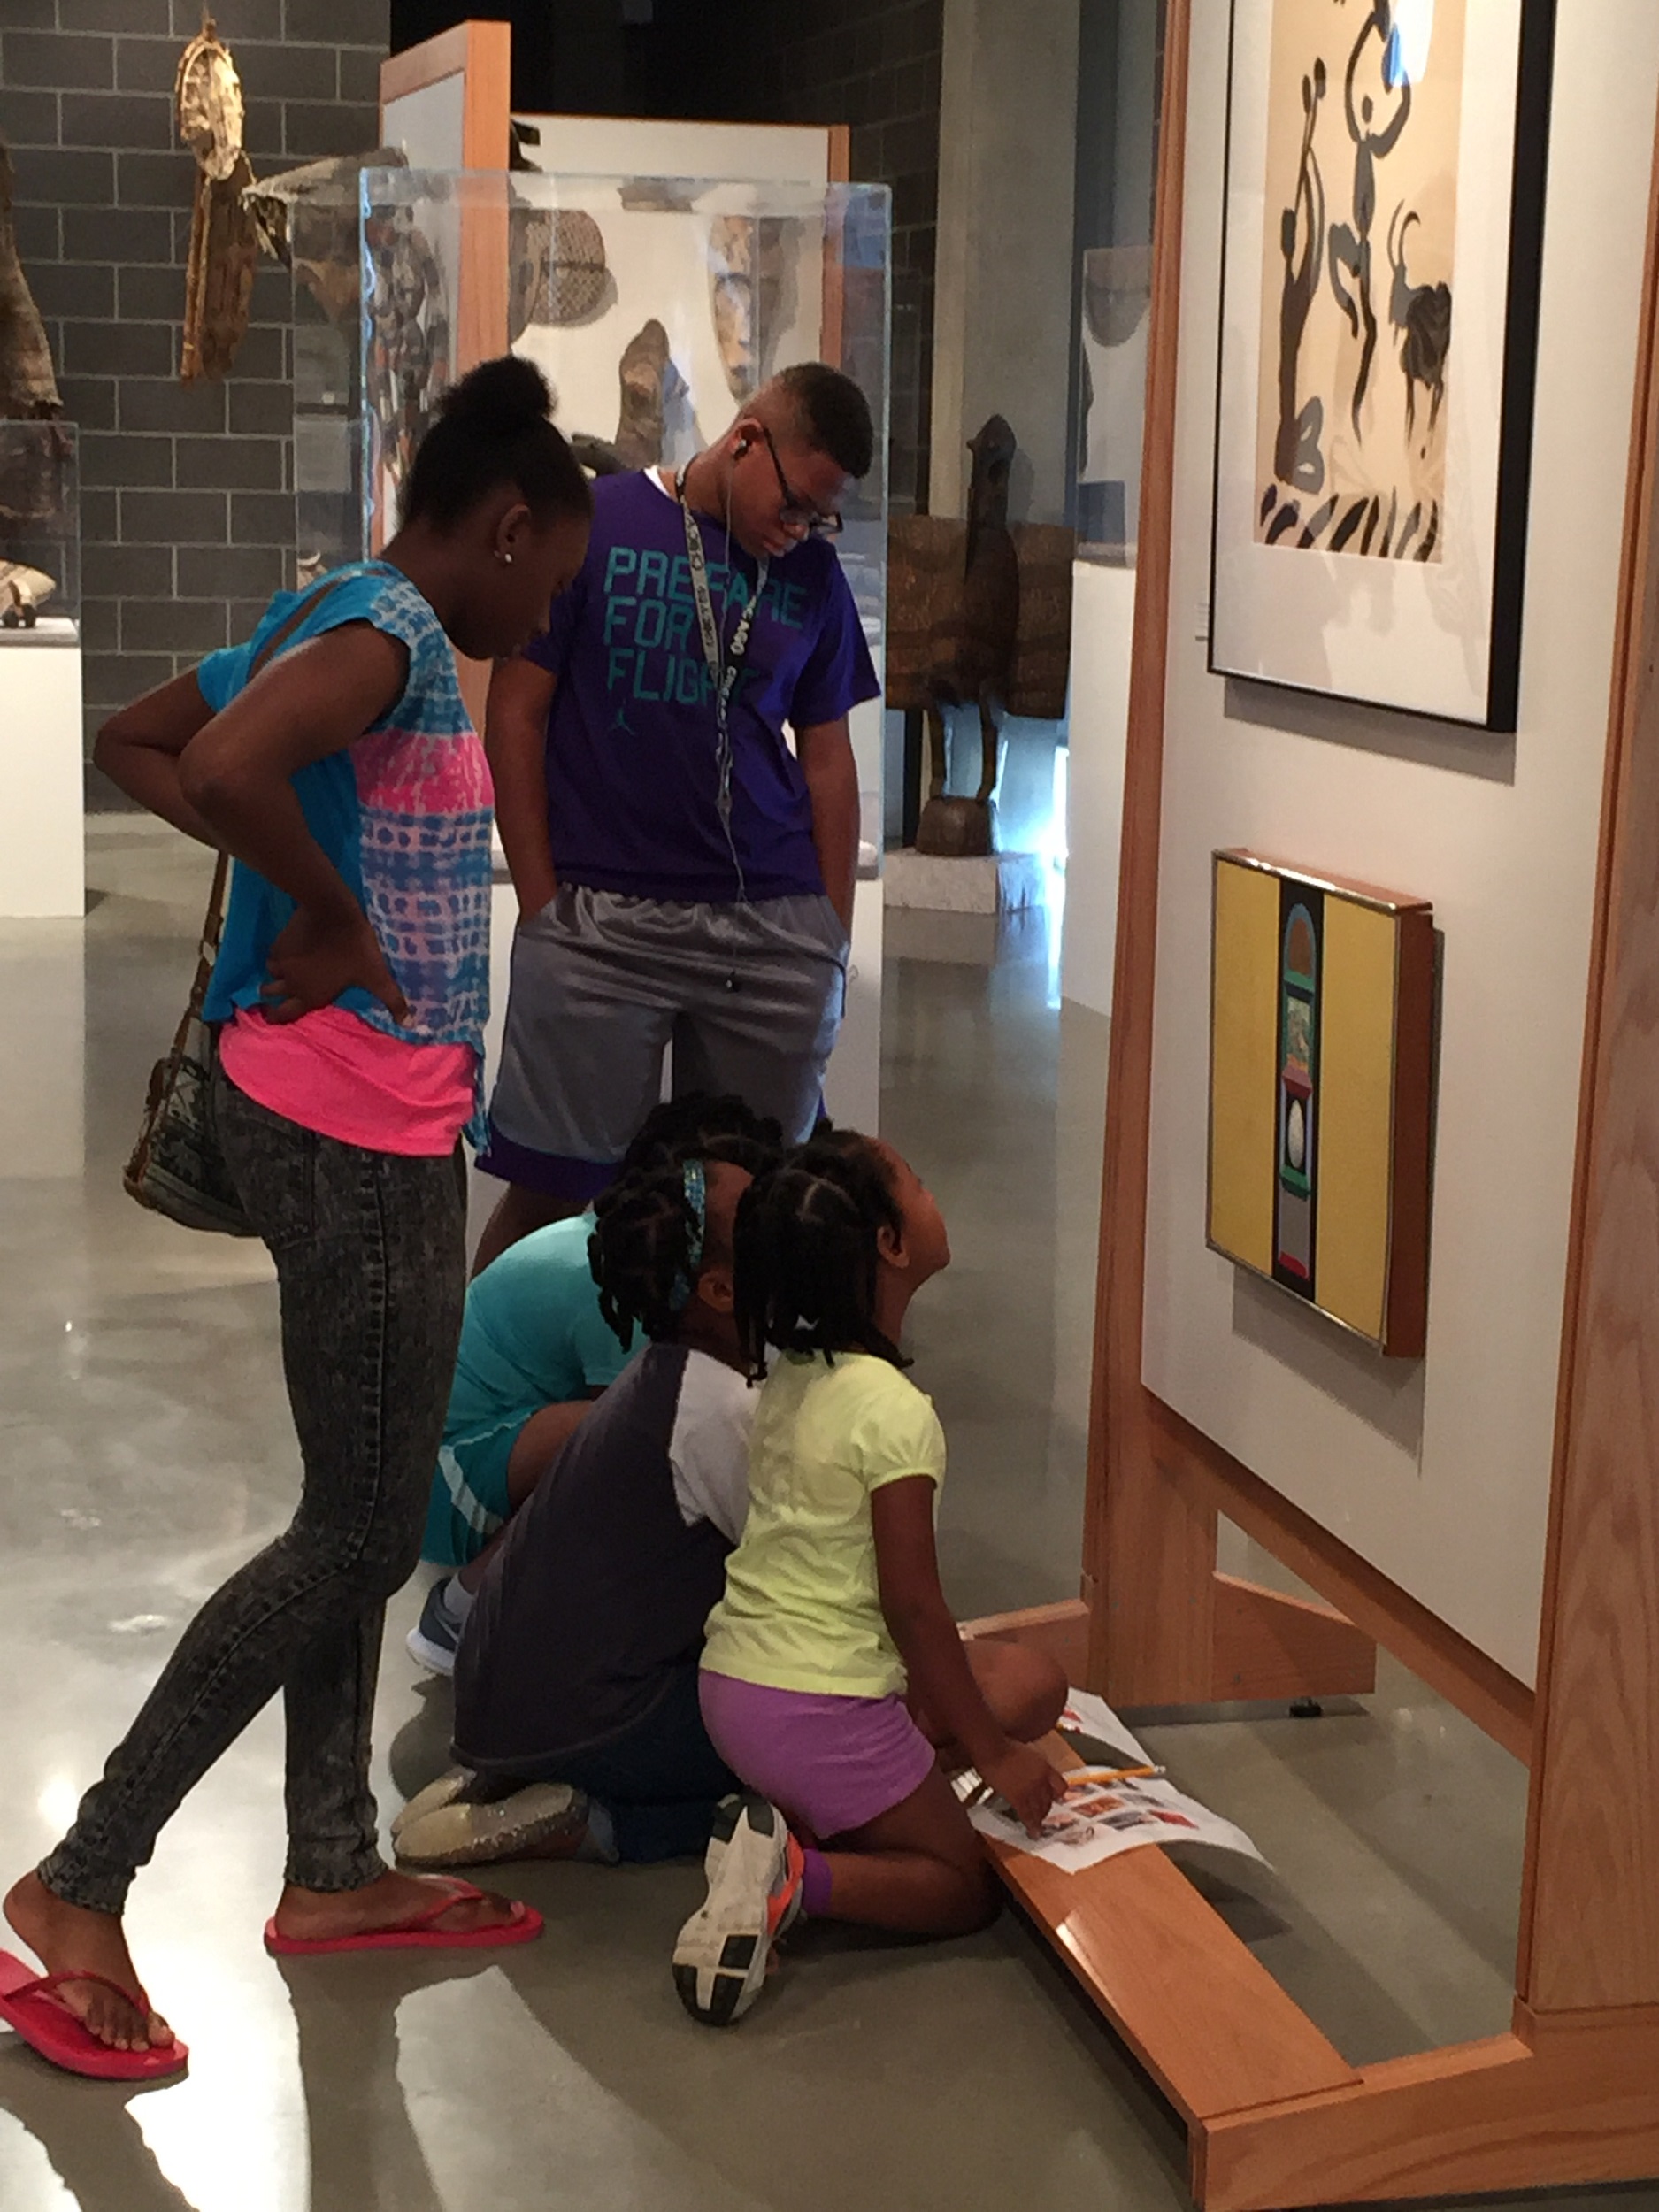 Photograph of five Black students looking at artwork in a gallery